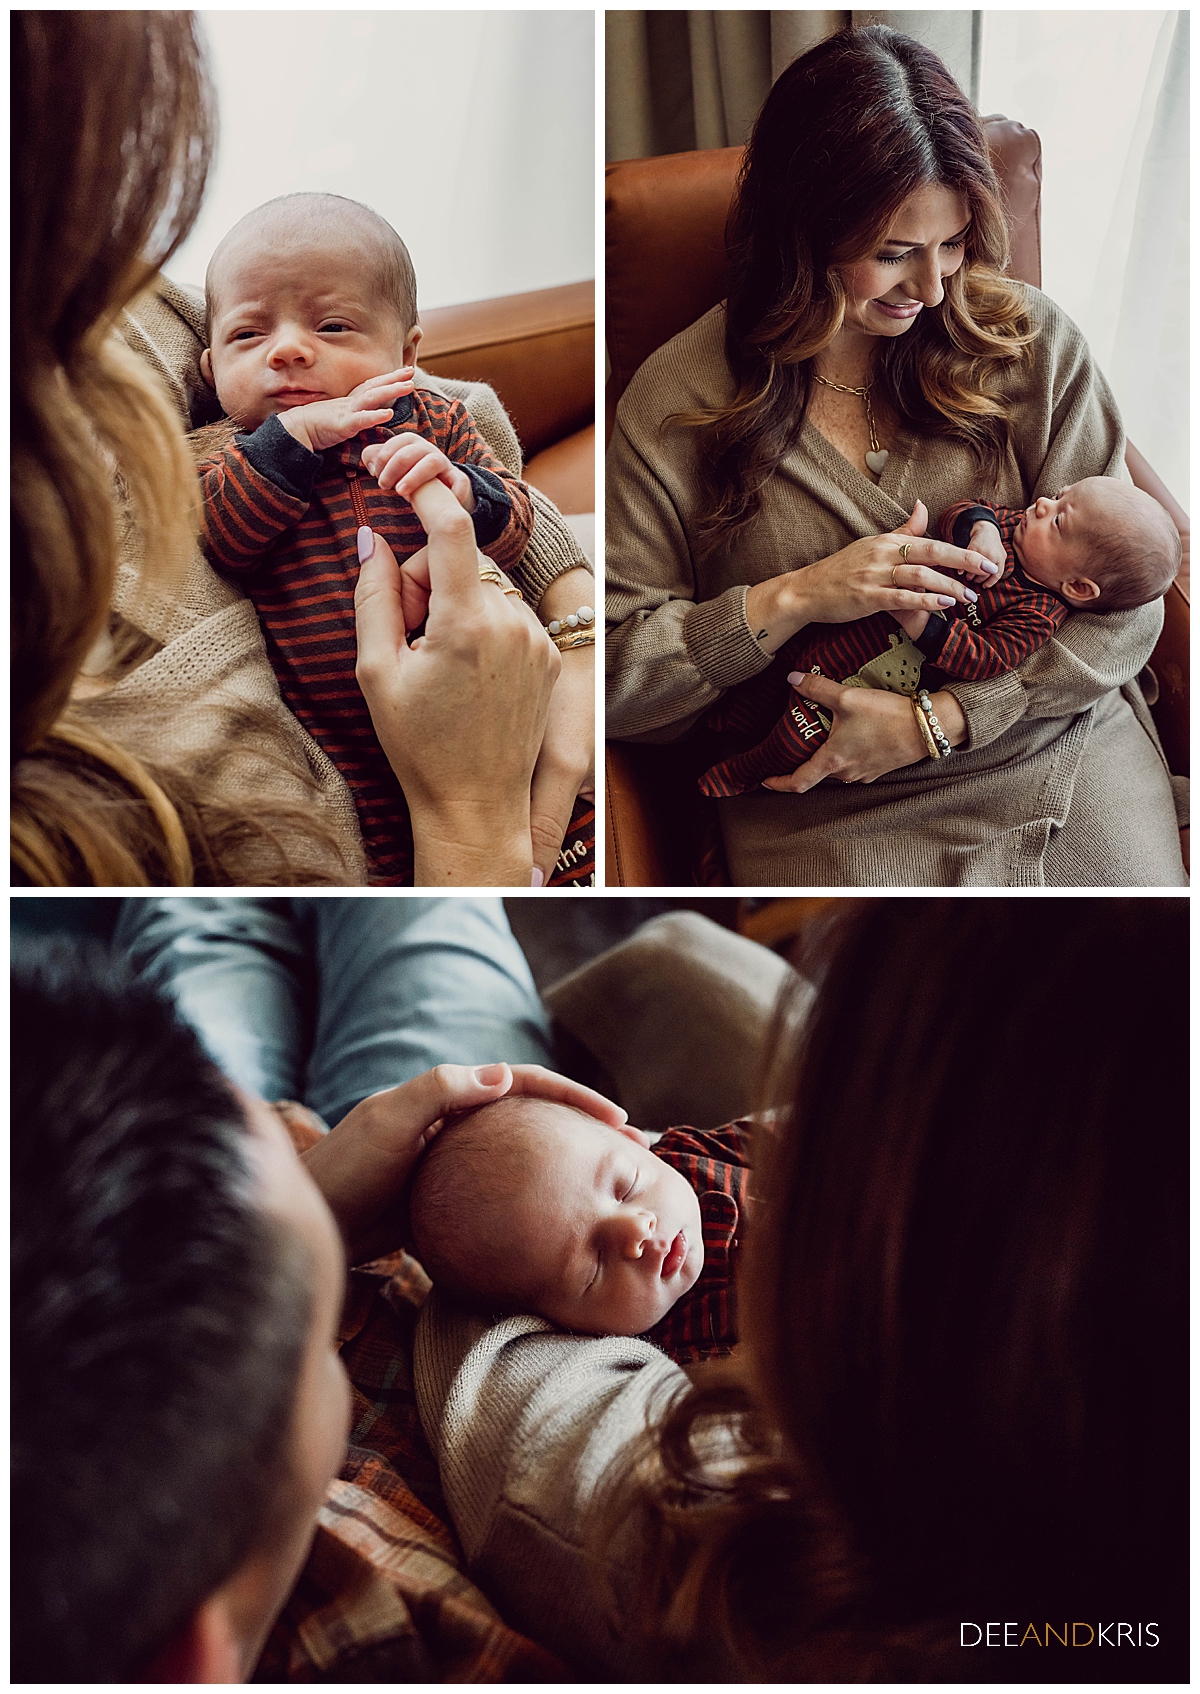 Three images: Top left image of baby holding mom's finger. Top right image of Mom rocking baby next to a window. Bottom image aerial view of both parents holding baby.